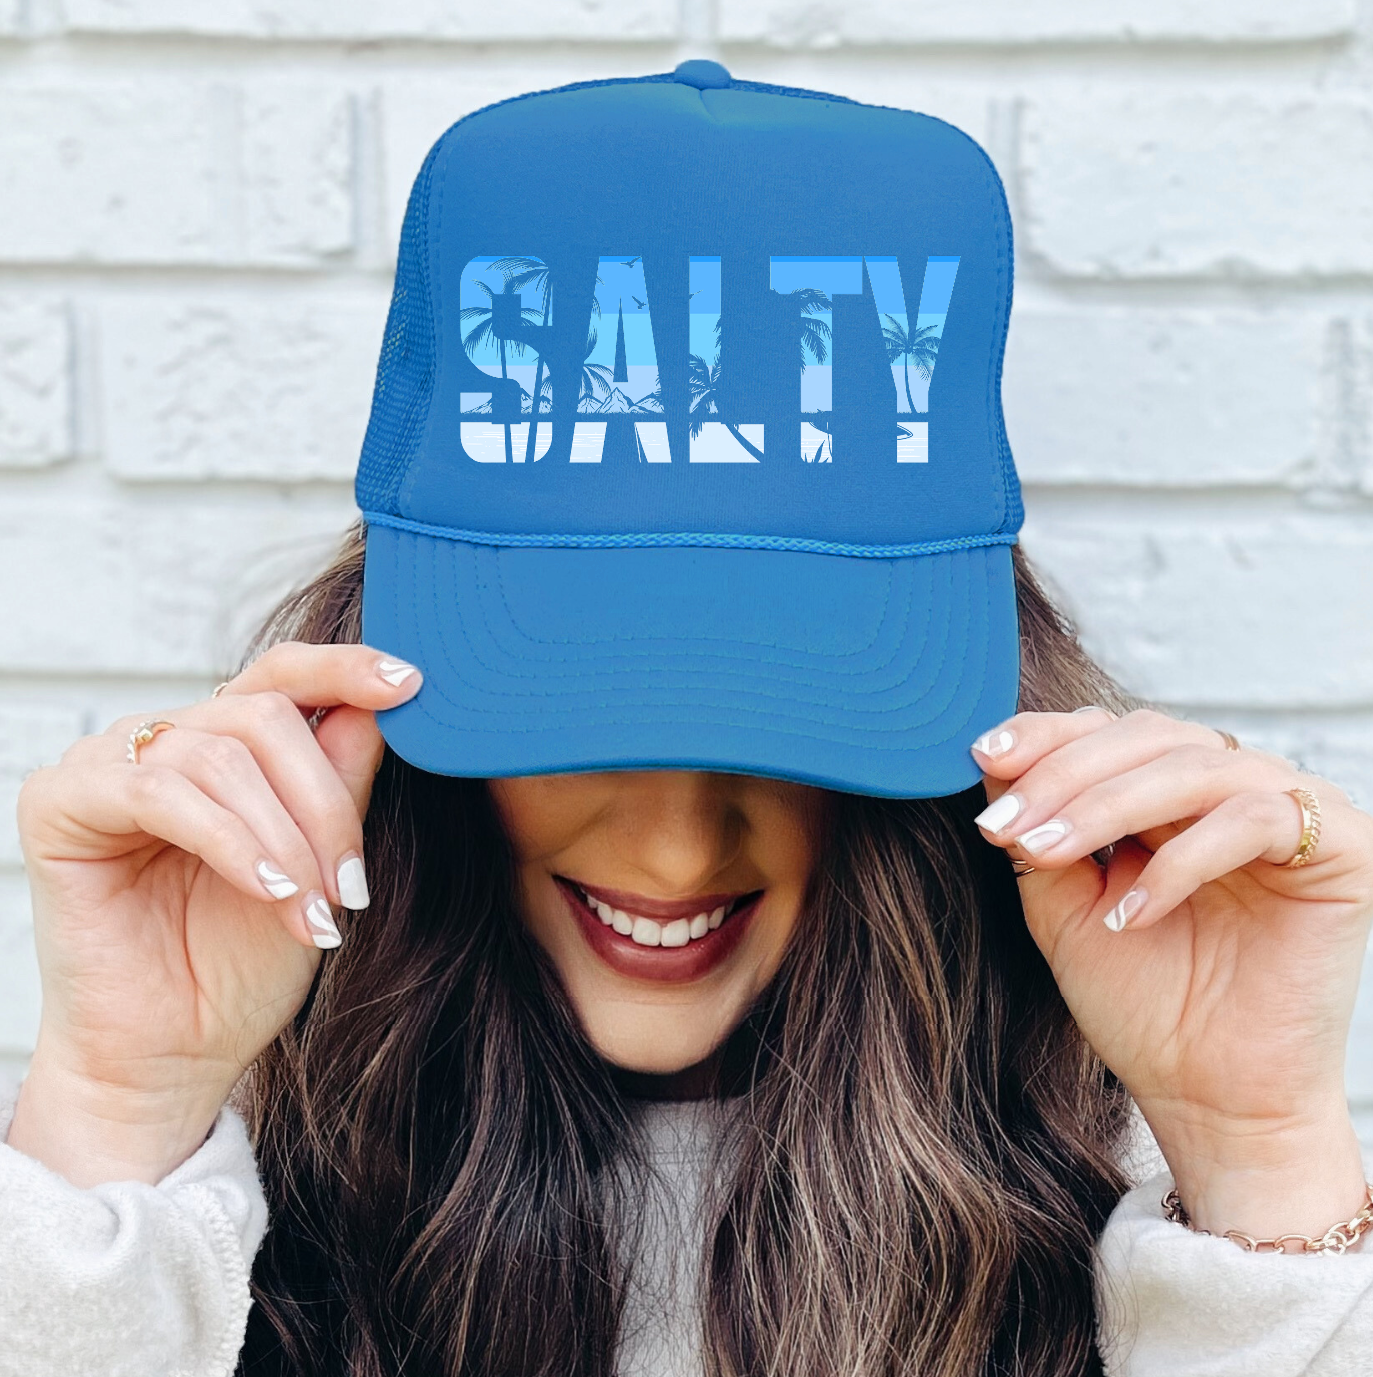 Salty - Trucker Hat/ Funny Gifts for Her / Vacation Hats/ Beach Hat/ Girls Trip Hats